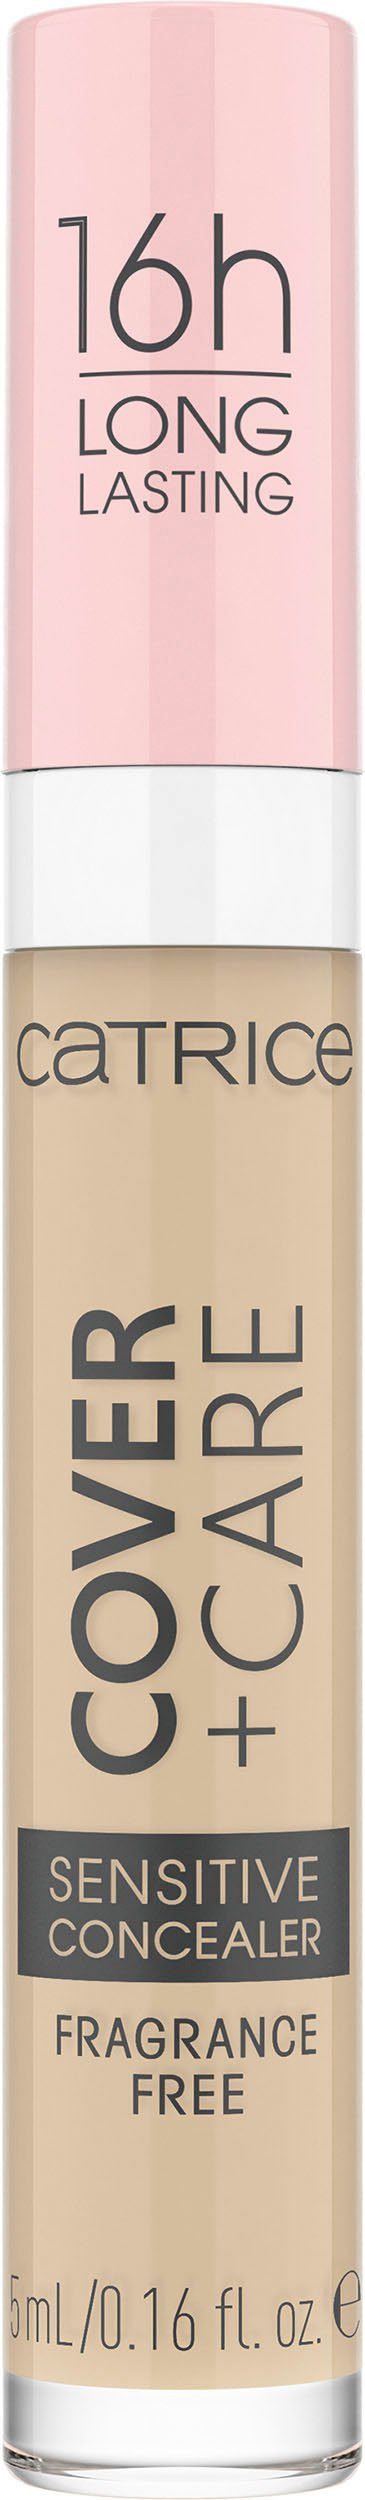 Concealer Concealer, 002N Catrice + nude Cover Sensitive 3-tlg. Catrice Care